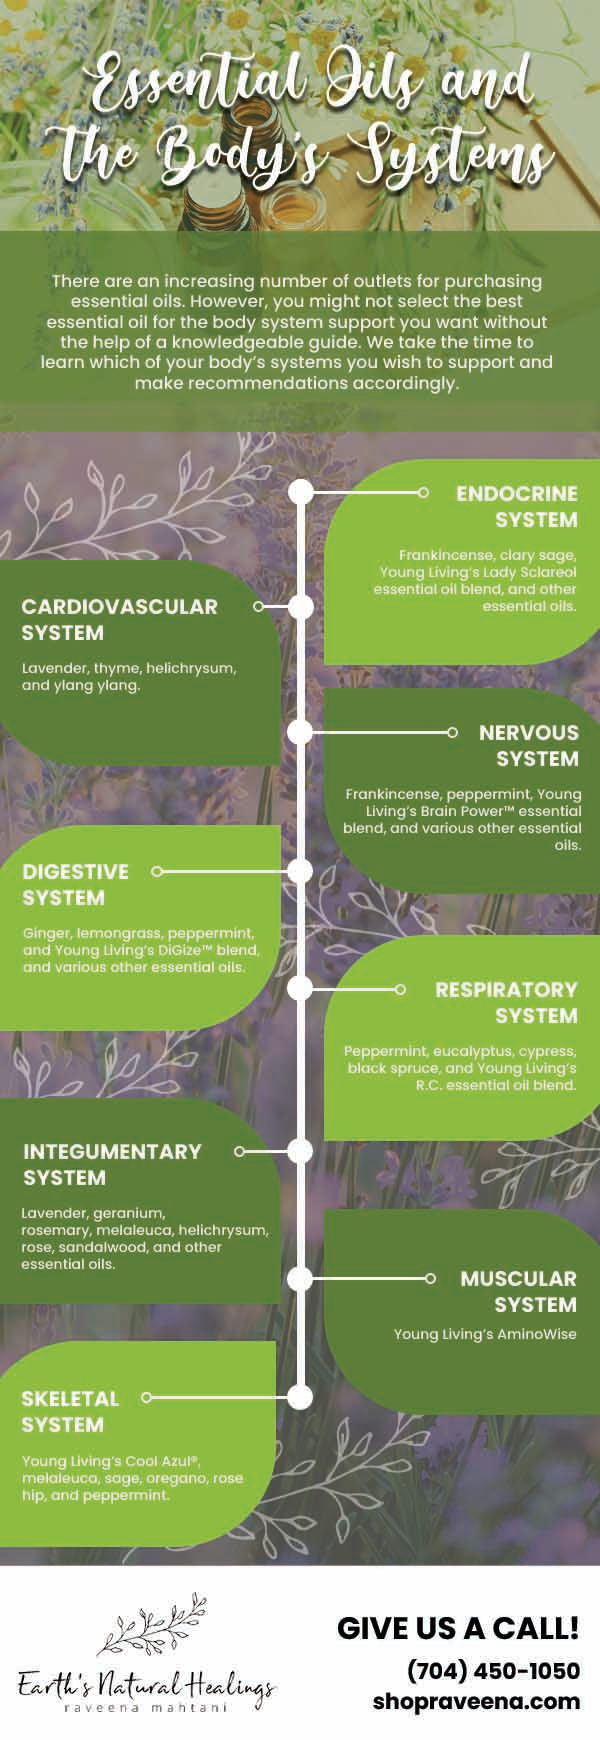 Essential Oils and the Body’s Systems [infographic]